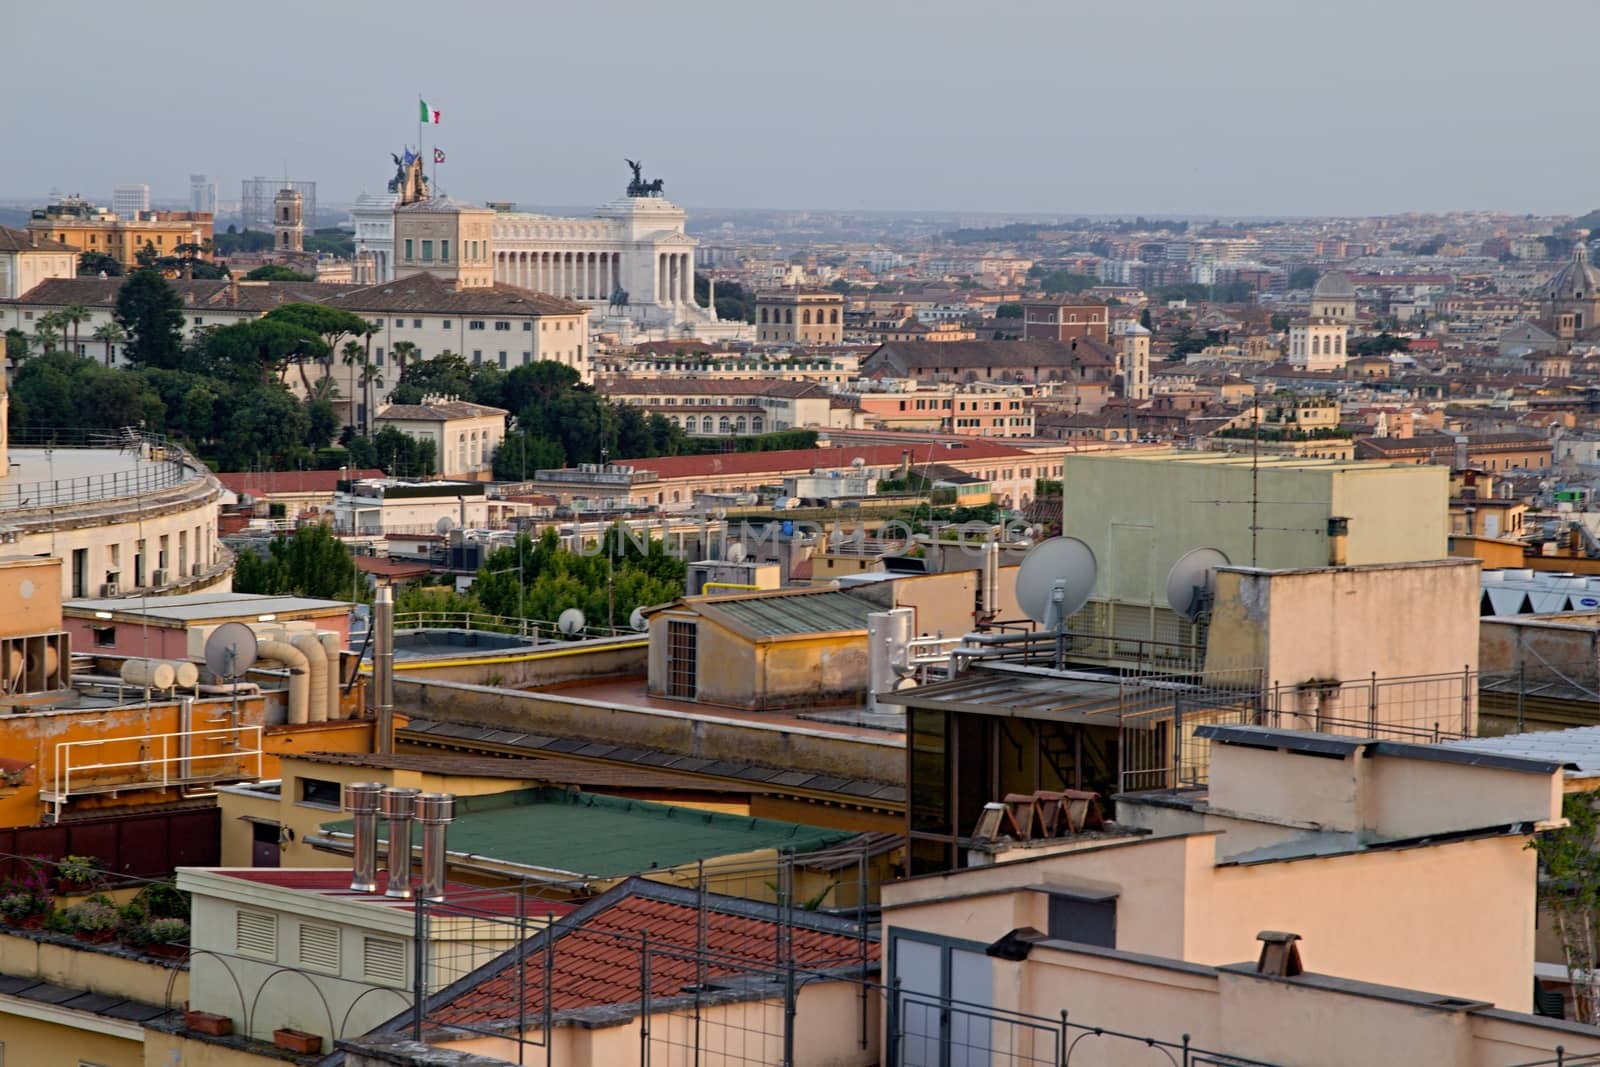 Photo shows Rome cityscape with houses and roofs.